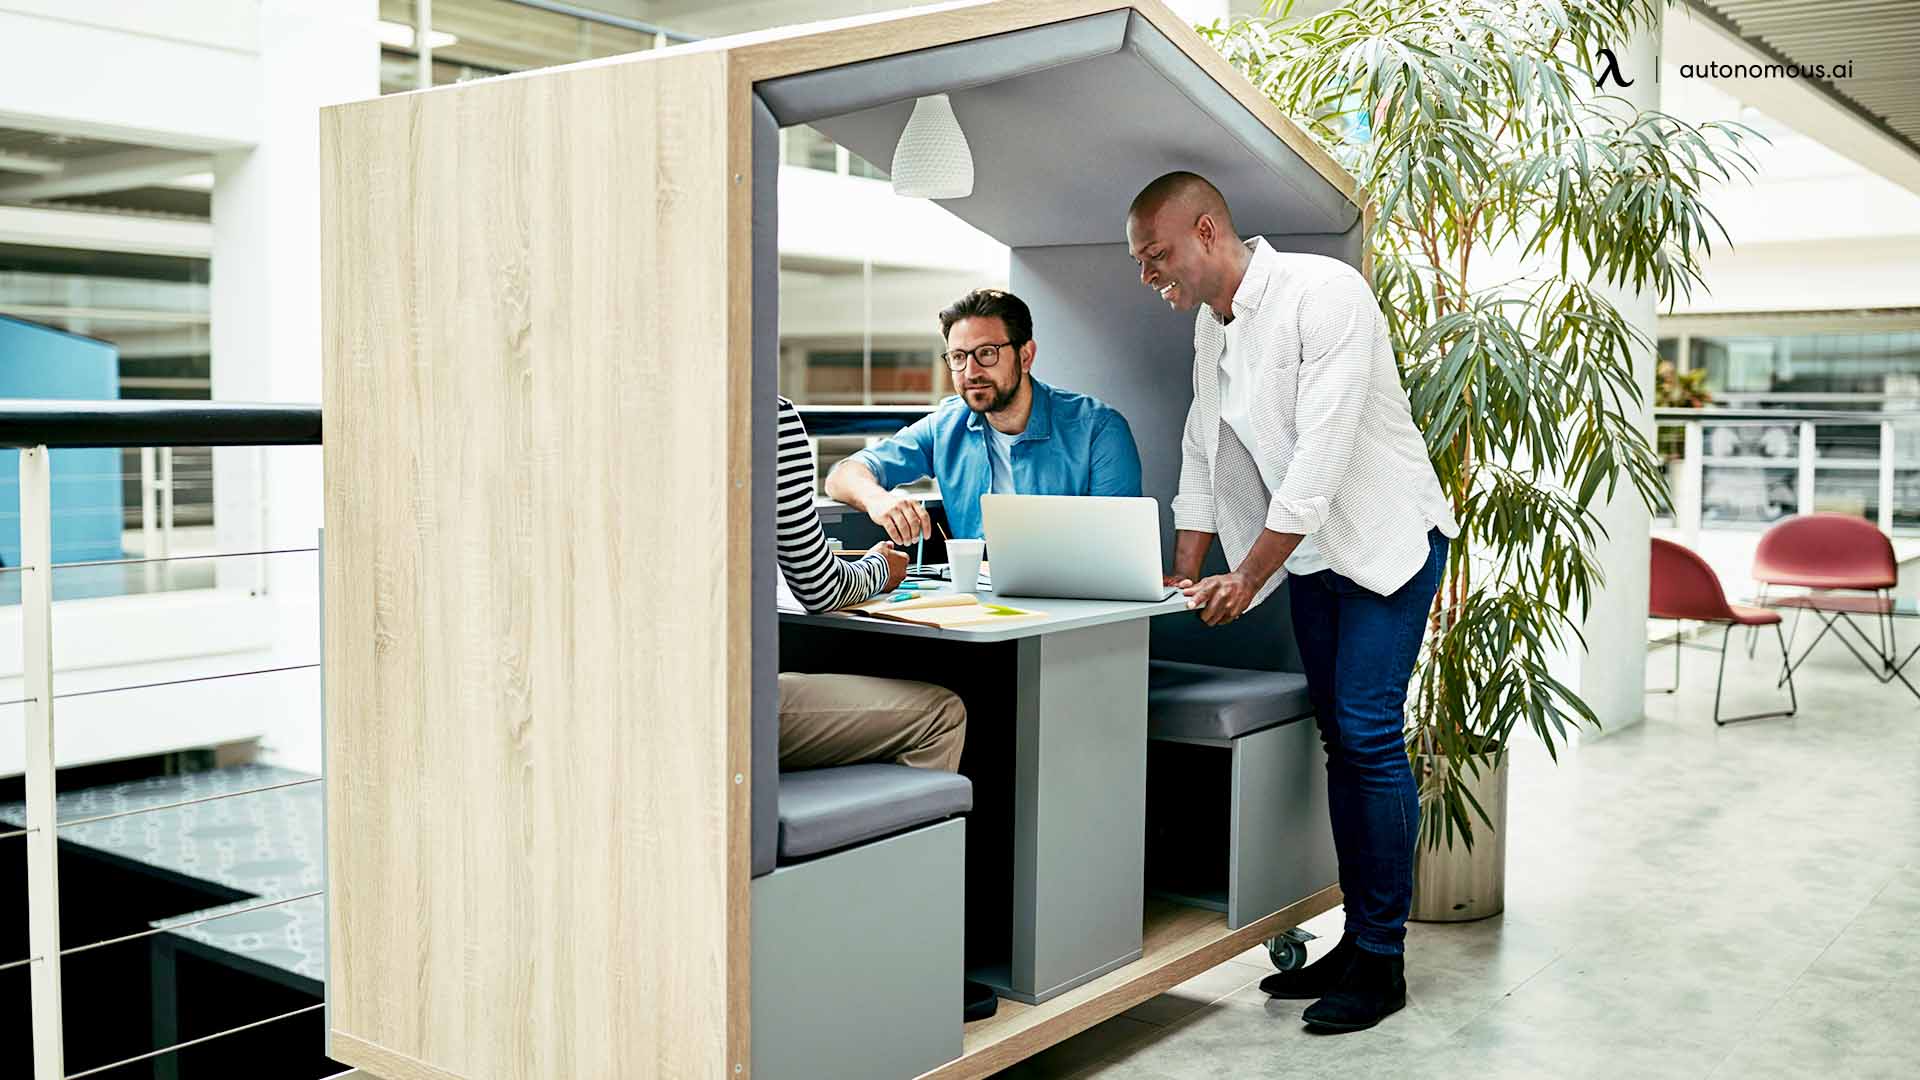 How to Create Privacy in an Open Office